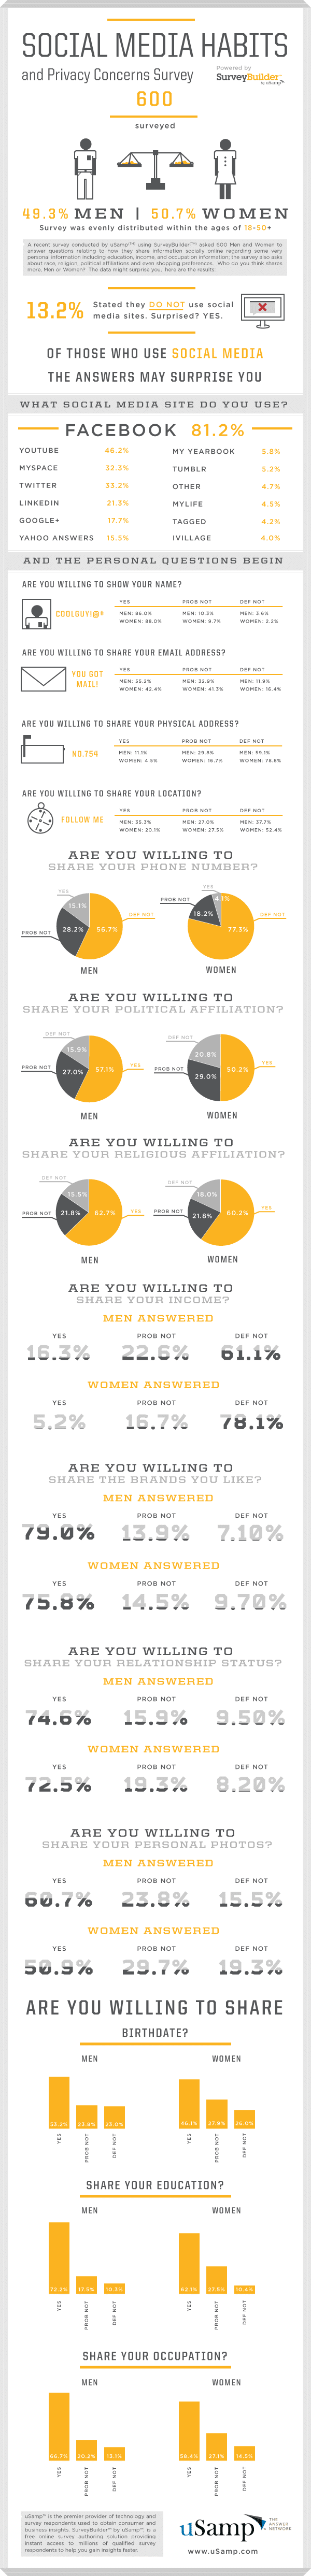 social sharing habit of men and women - infographic